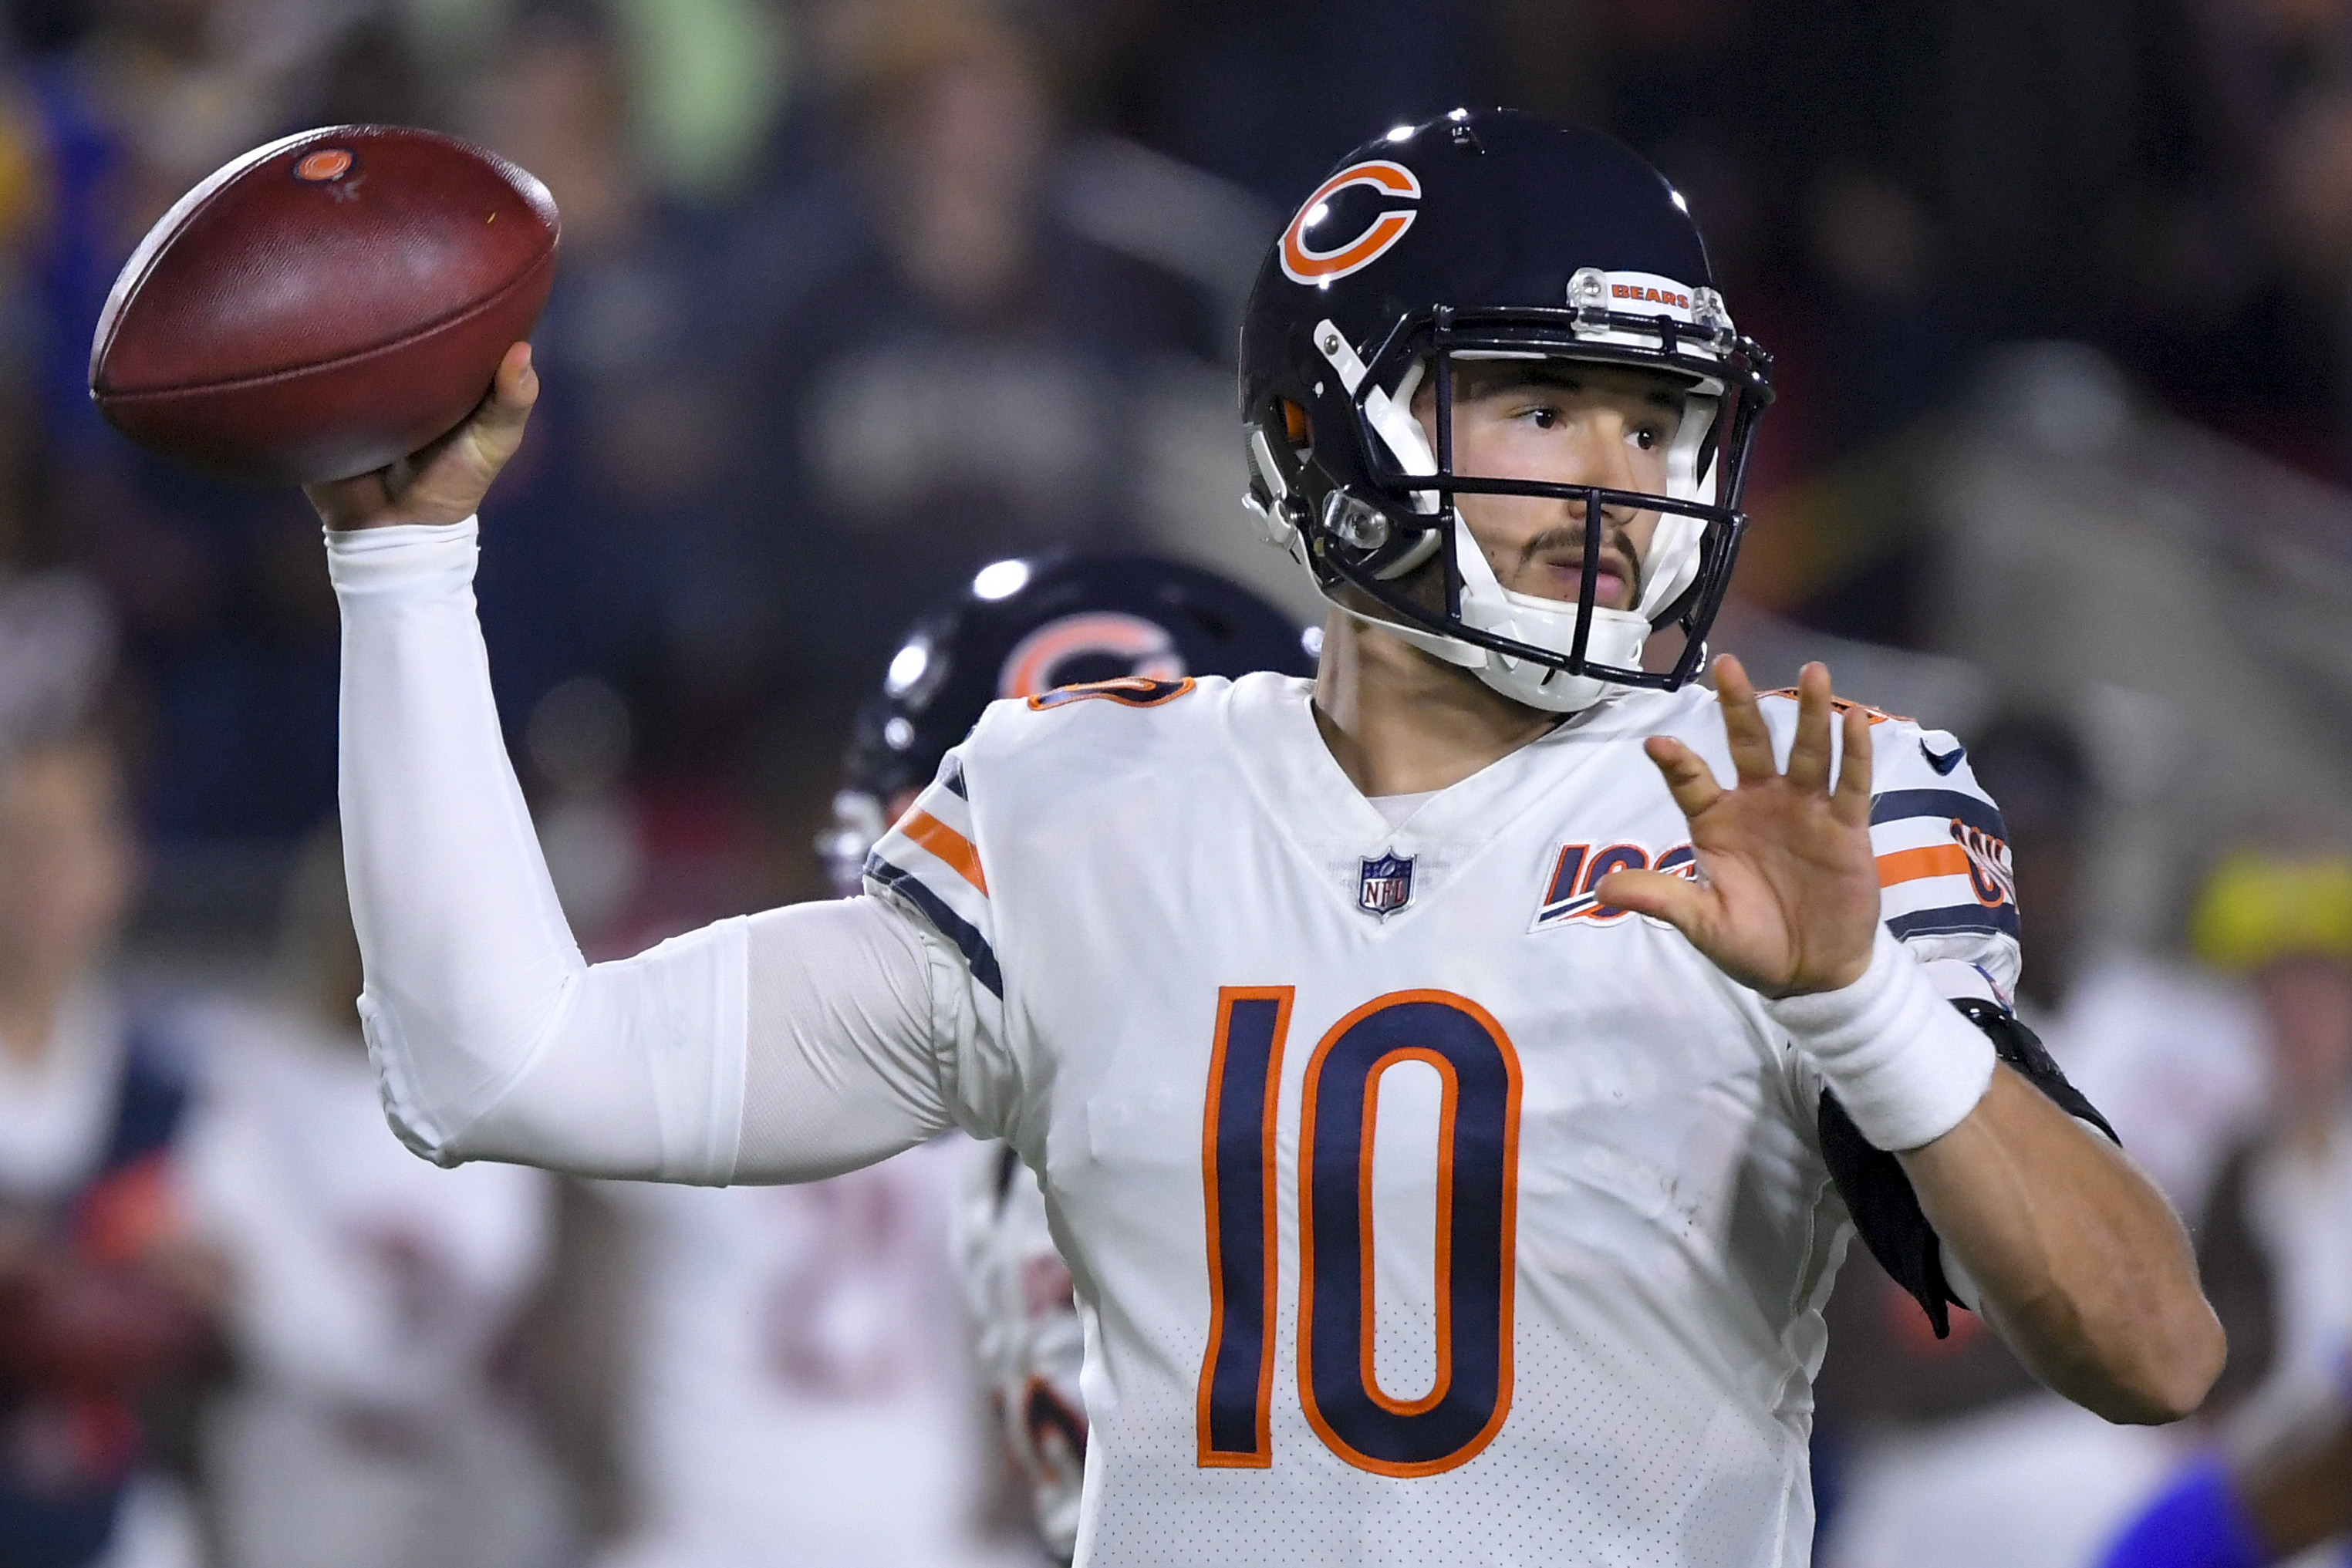 Mitchell Trubisky cleared to start for Bears against Giants